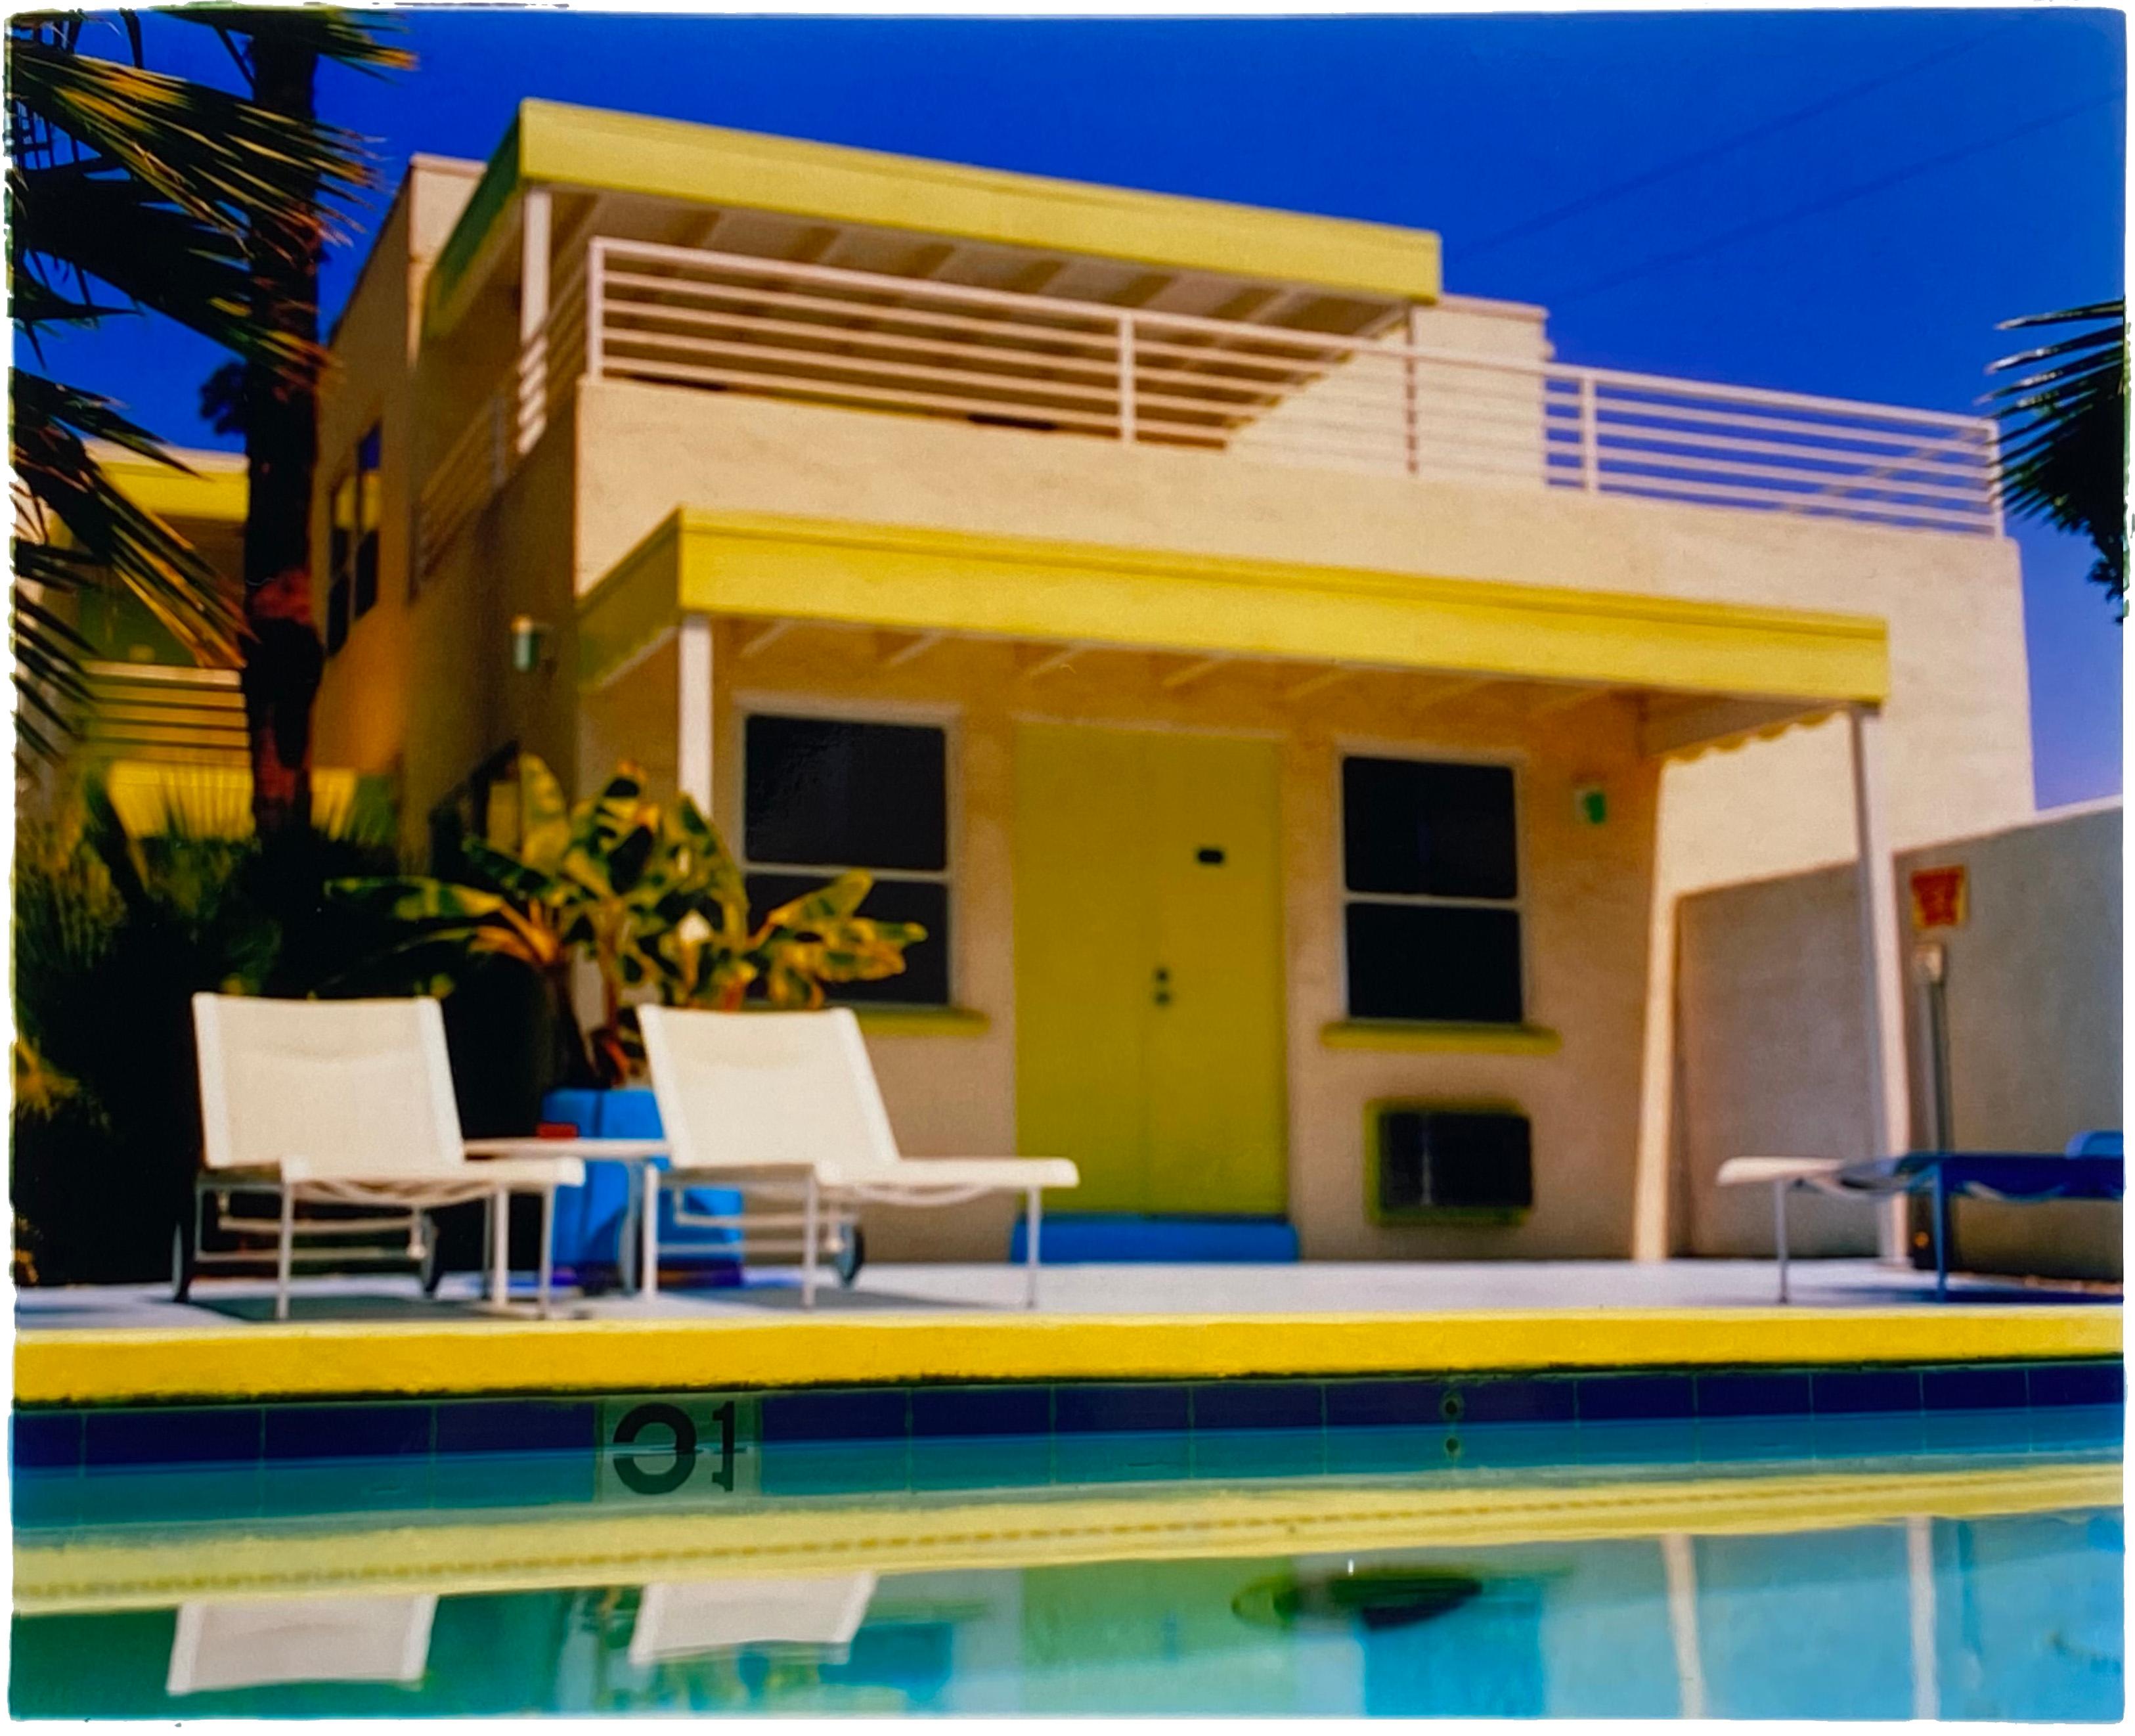 Set of Six Framed Artworks from Richard Heeps Dream in Colour series.
Capturing the classic Palm Springs poolside photographs taken at the mid-century architecture backdrop, Ballantines Movie Colony.

Each framed artwork measures 16